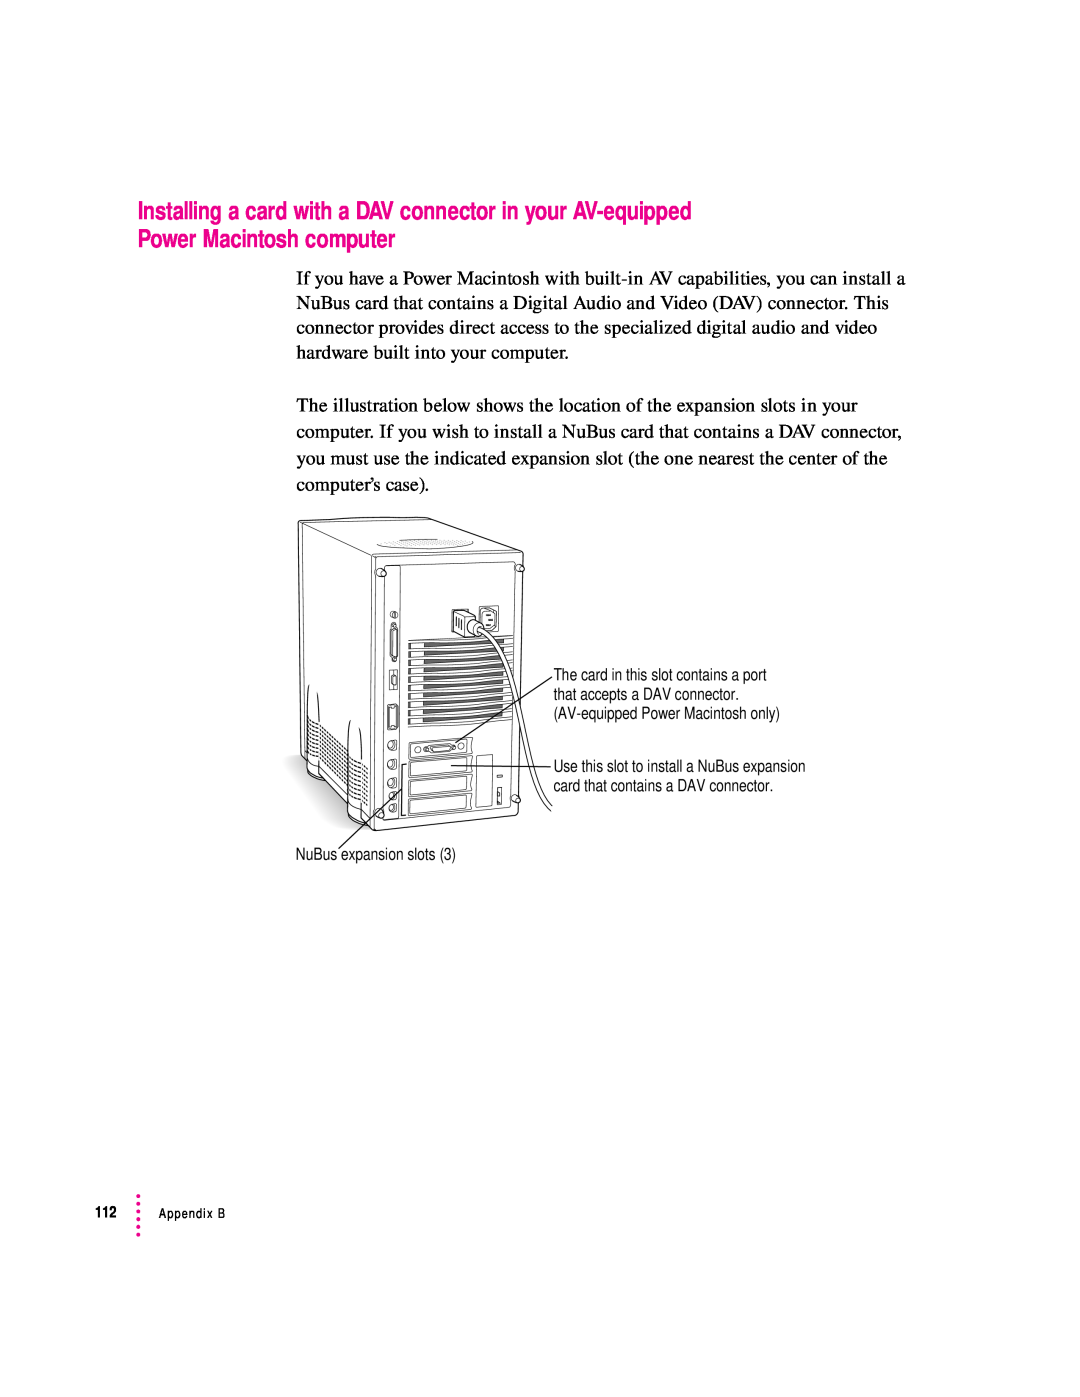 Apple 8100 Series manual Installing a card with a DAV connector in your AV-equipped, Power Macintosh computer 